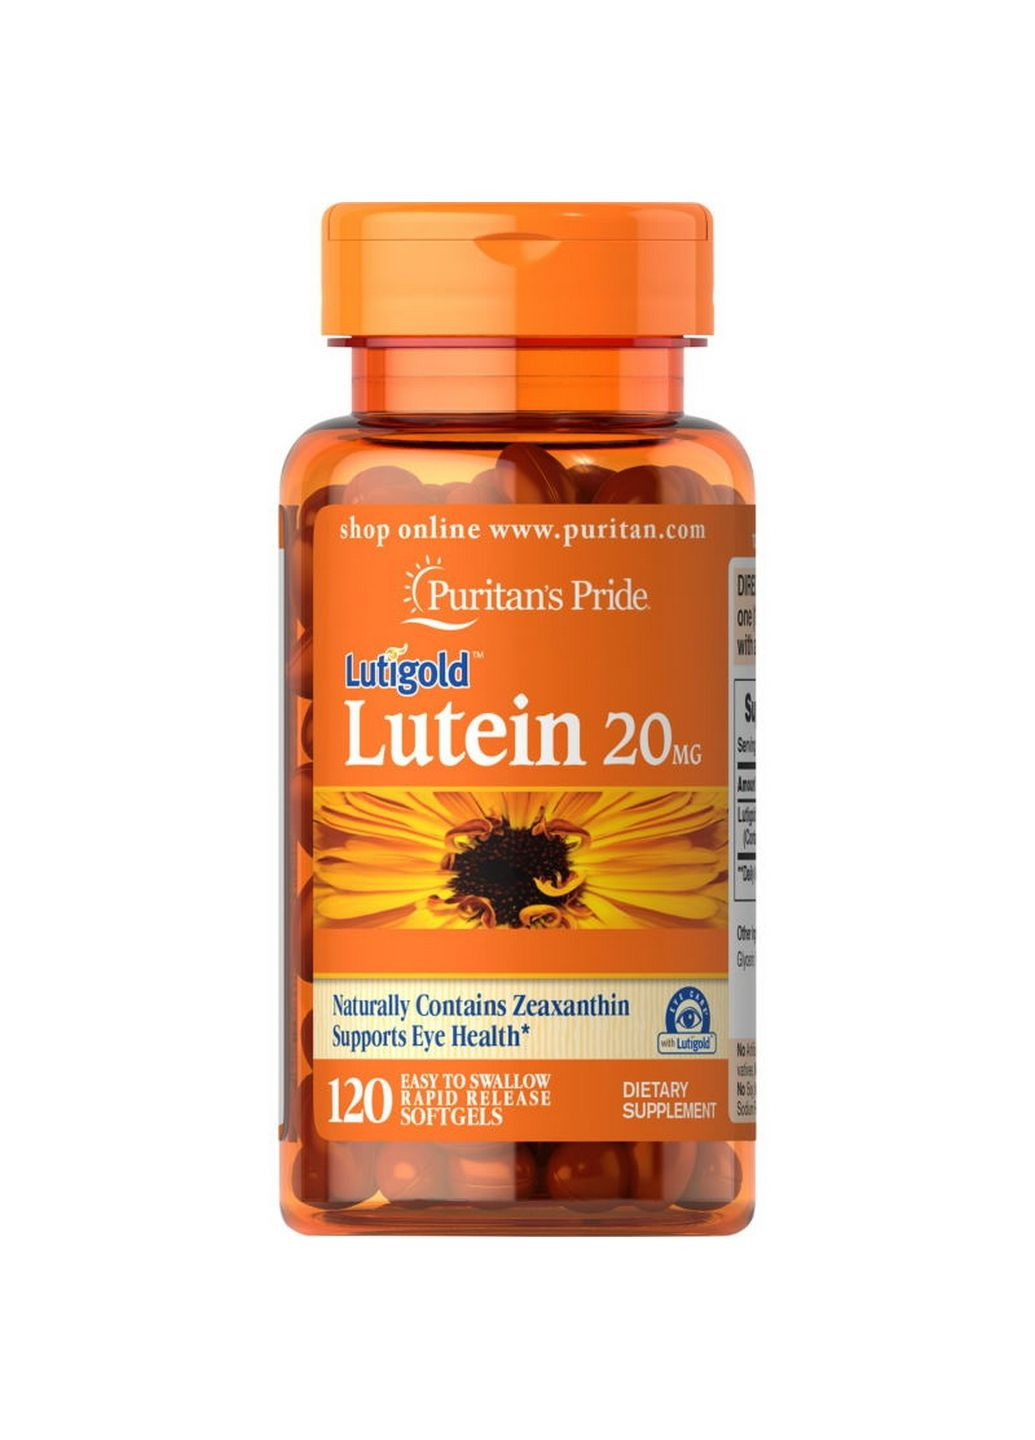 Натуральна добавка Lutein 20 mg with Zeaxanthin, 120 капсул Puritans Pride (293342876)